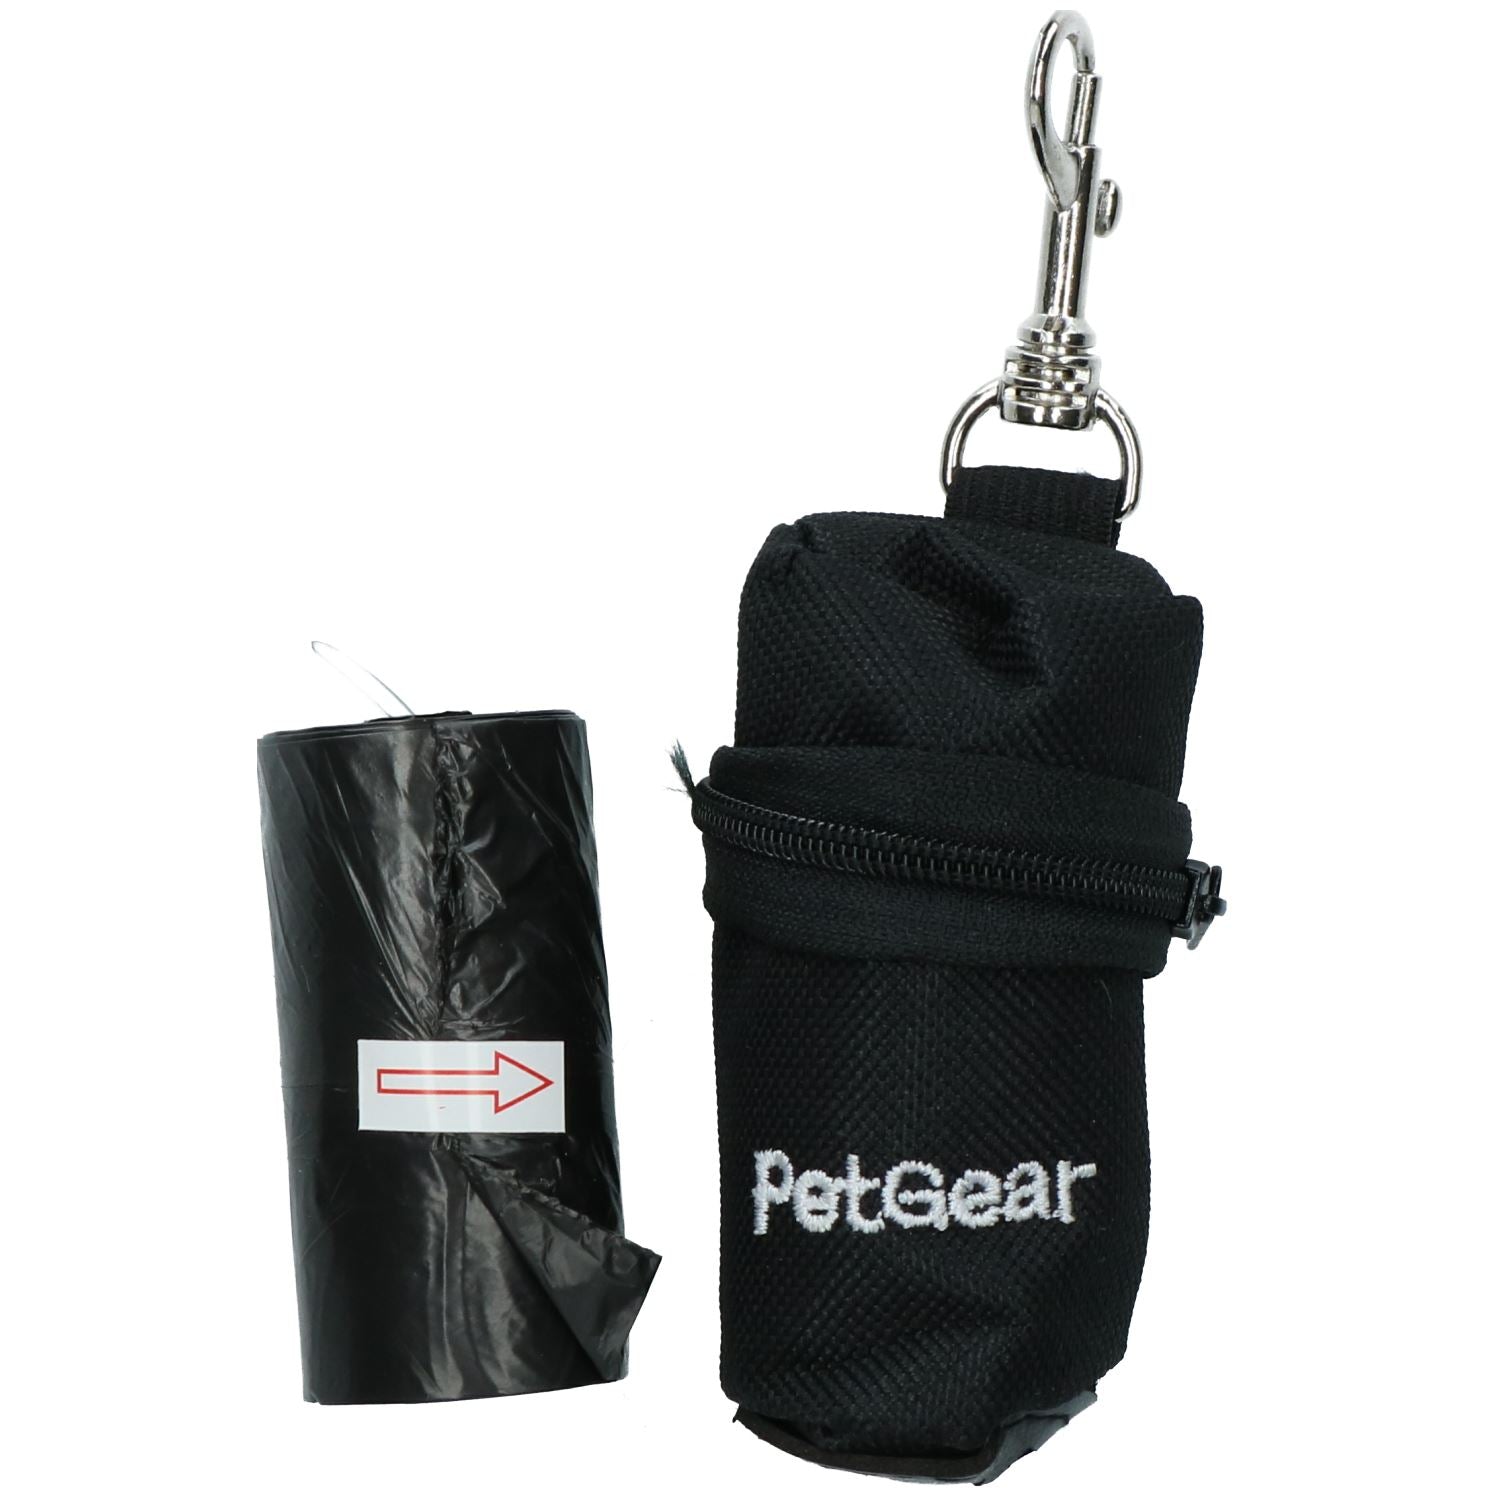 Pet Dog Puppy Canvas Poo Bag Holder Dispenser & Scoop Bags With Clip